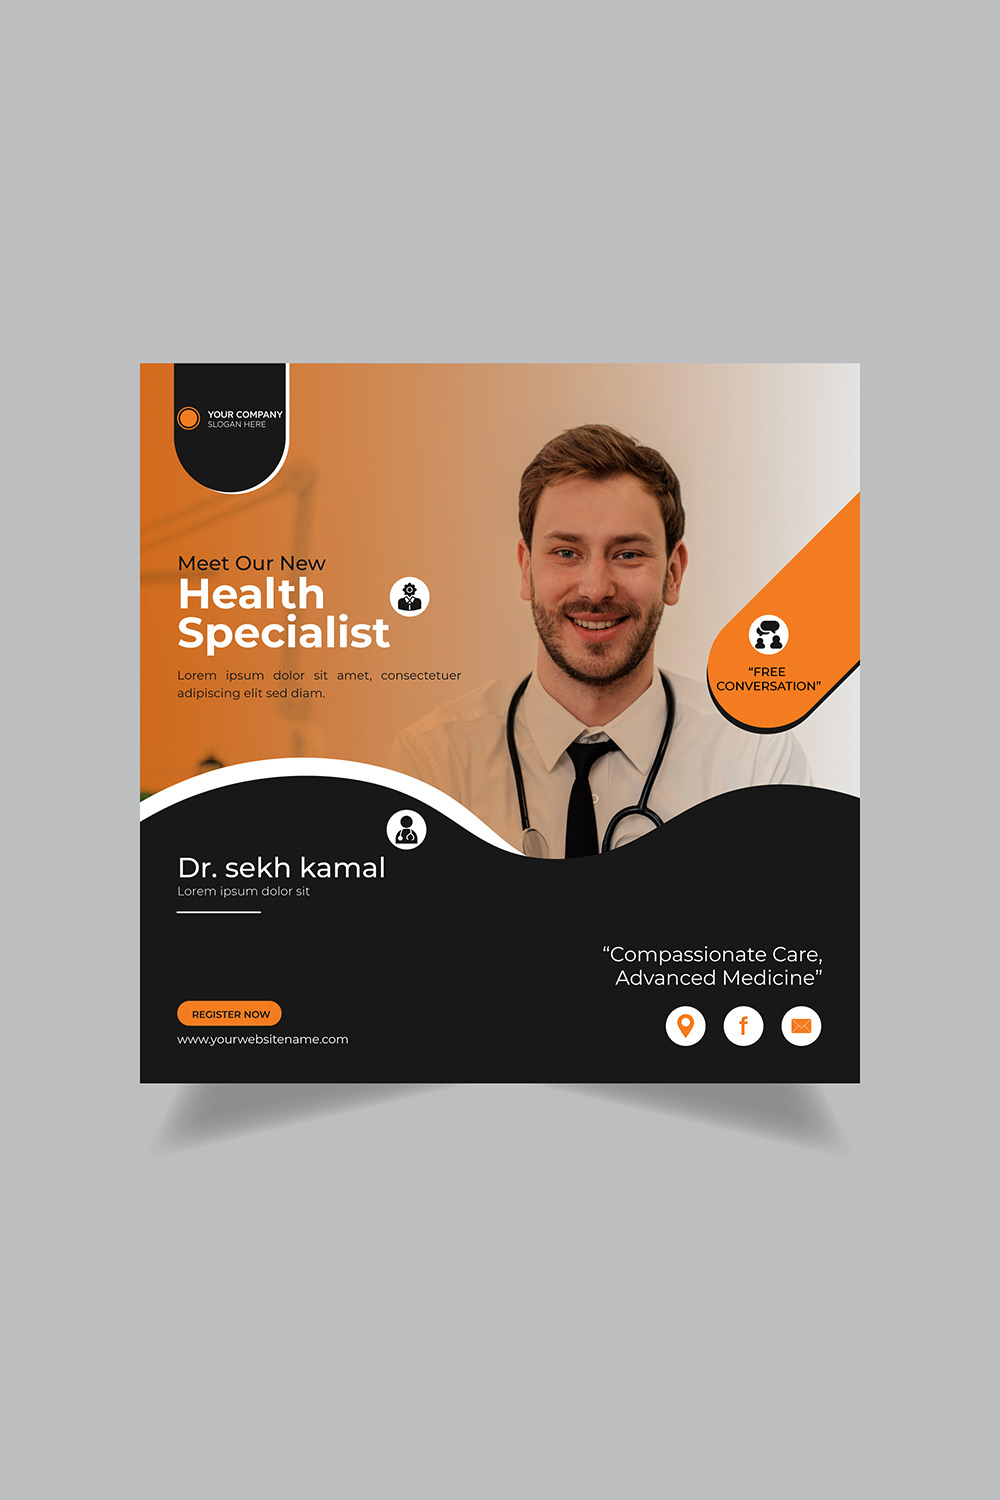 Medical health care flyer social media and horizontal web banner template only-$2 pinterest preview image.